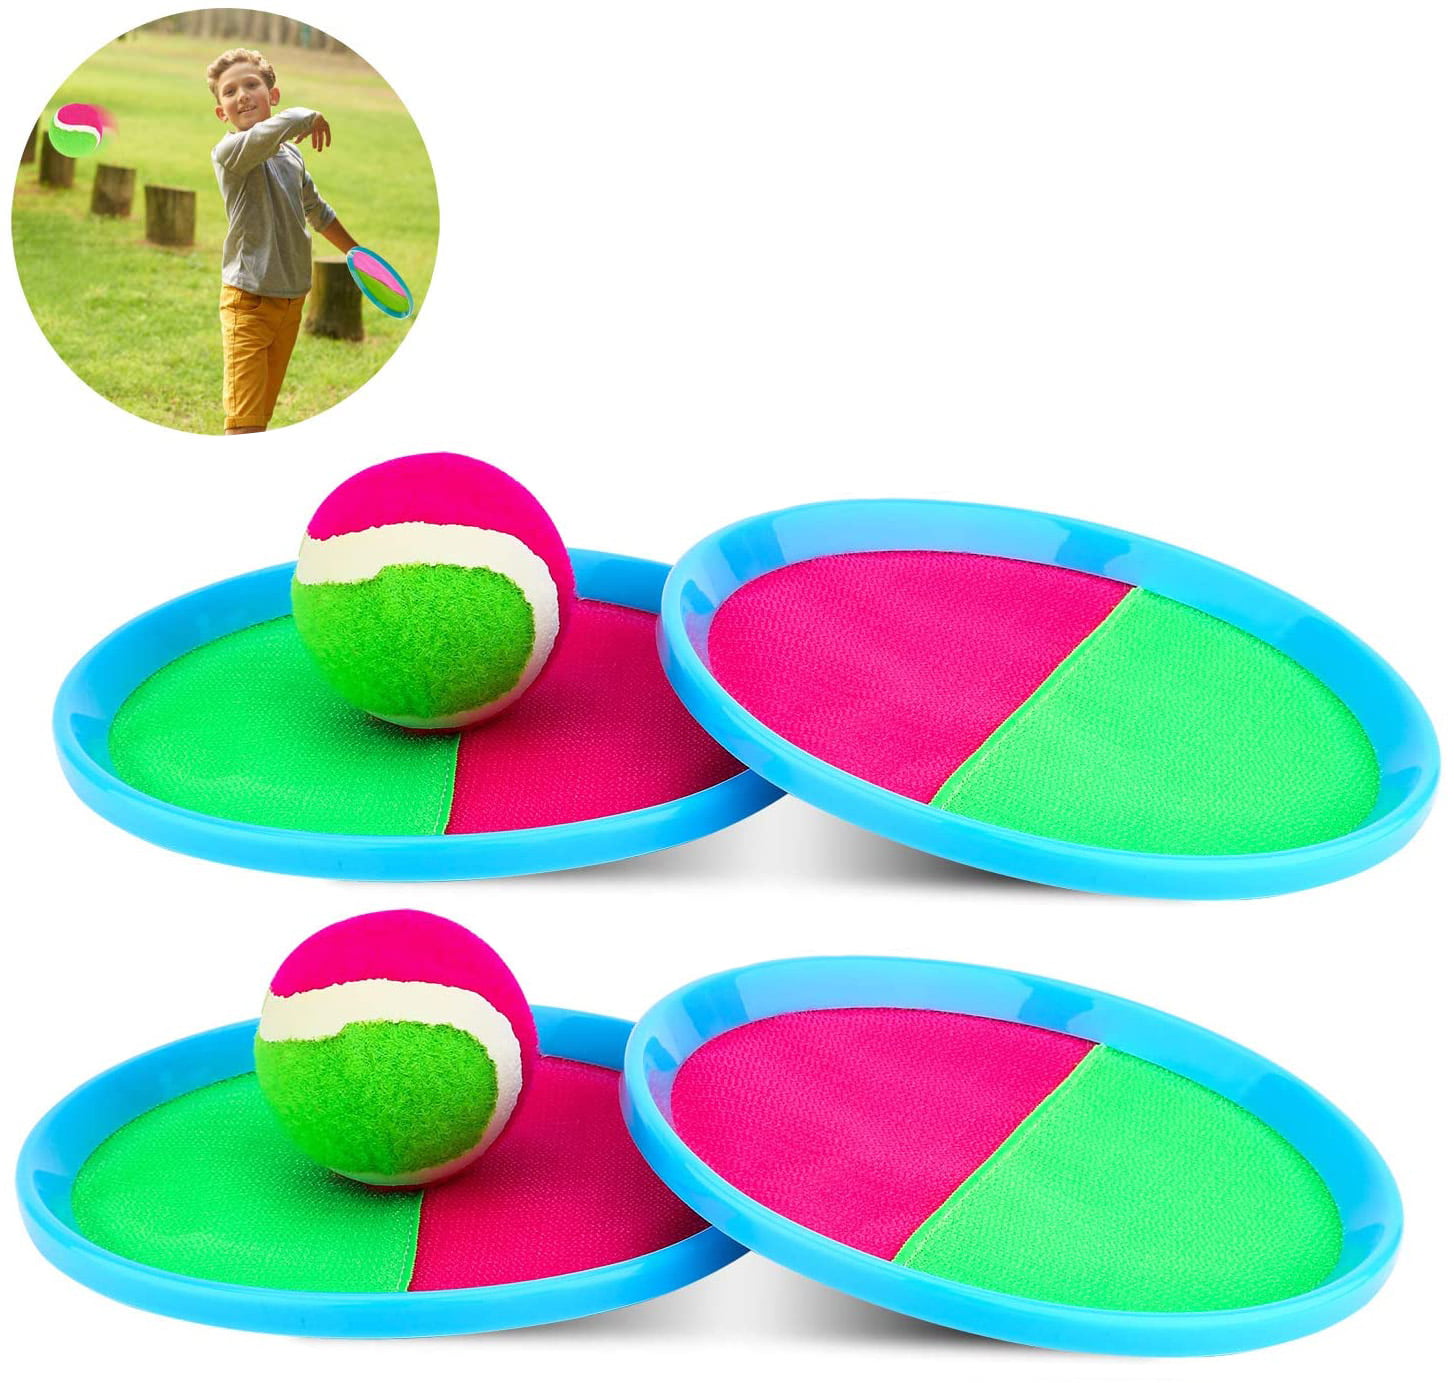 Yard Games Outdoor Toys Playground Sets for Backyards//Kids//Adults//Family Toss and Catch Ball Set Beach Games for Kids with 4 Paddles 4 Balls and 1 Storage Bag Outdoor Games for Kids